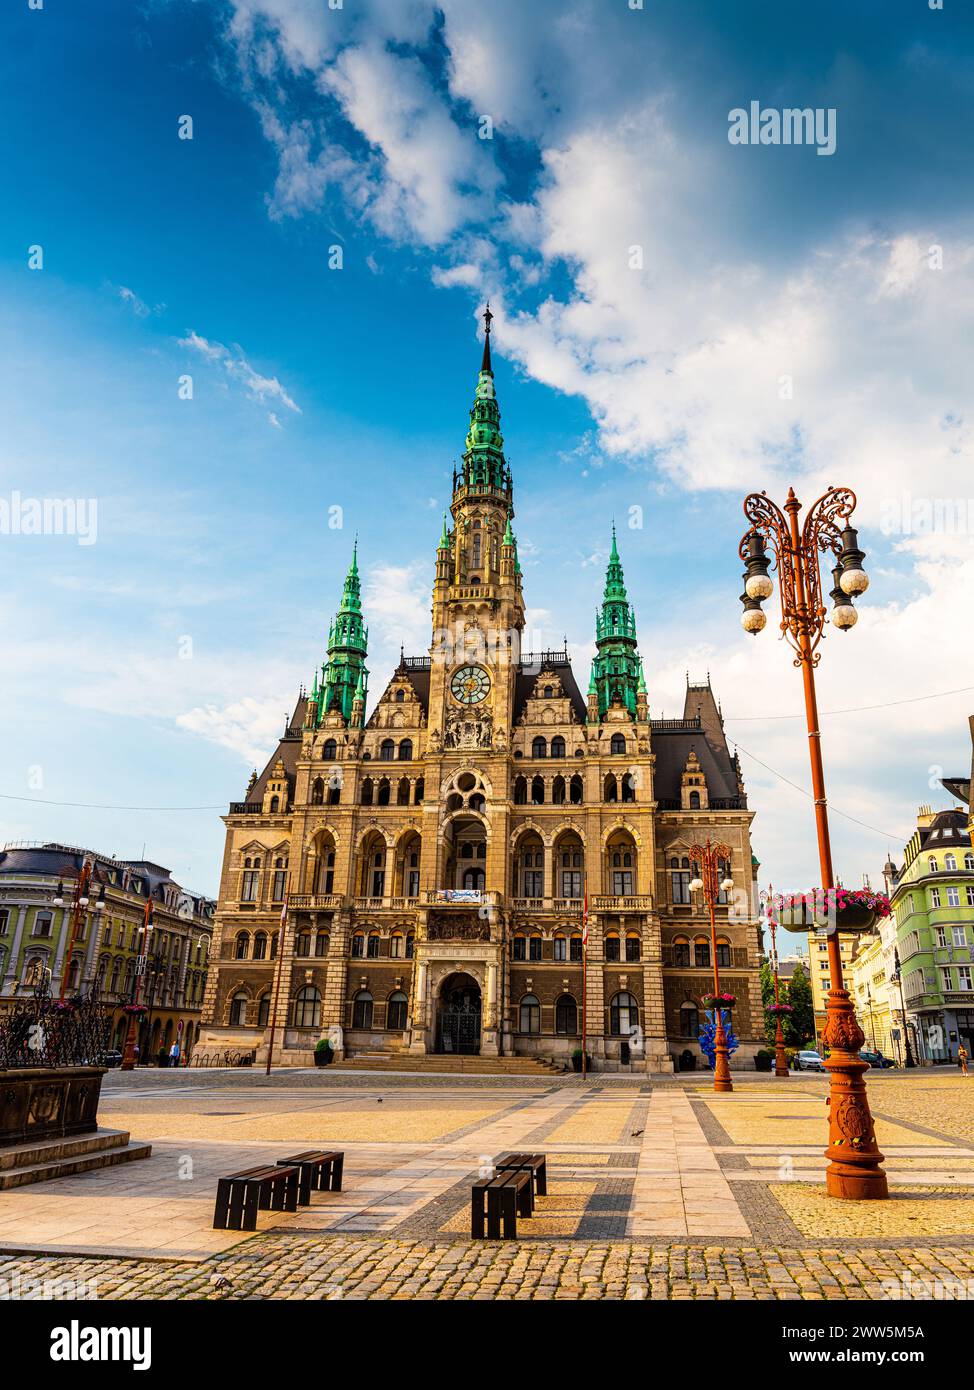 Liberec, Czech republic,19. 06. 2021. View of main square with Town Hall building against the background of a light blue sky Stock Photo